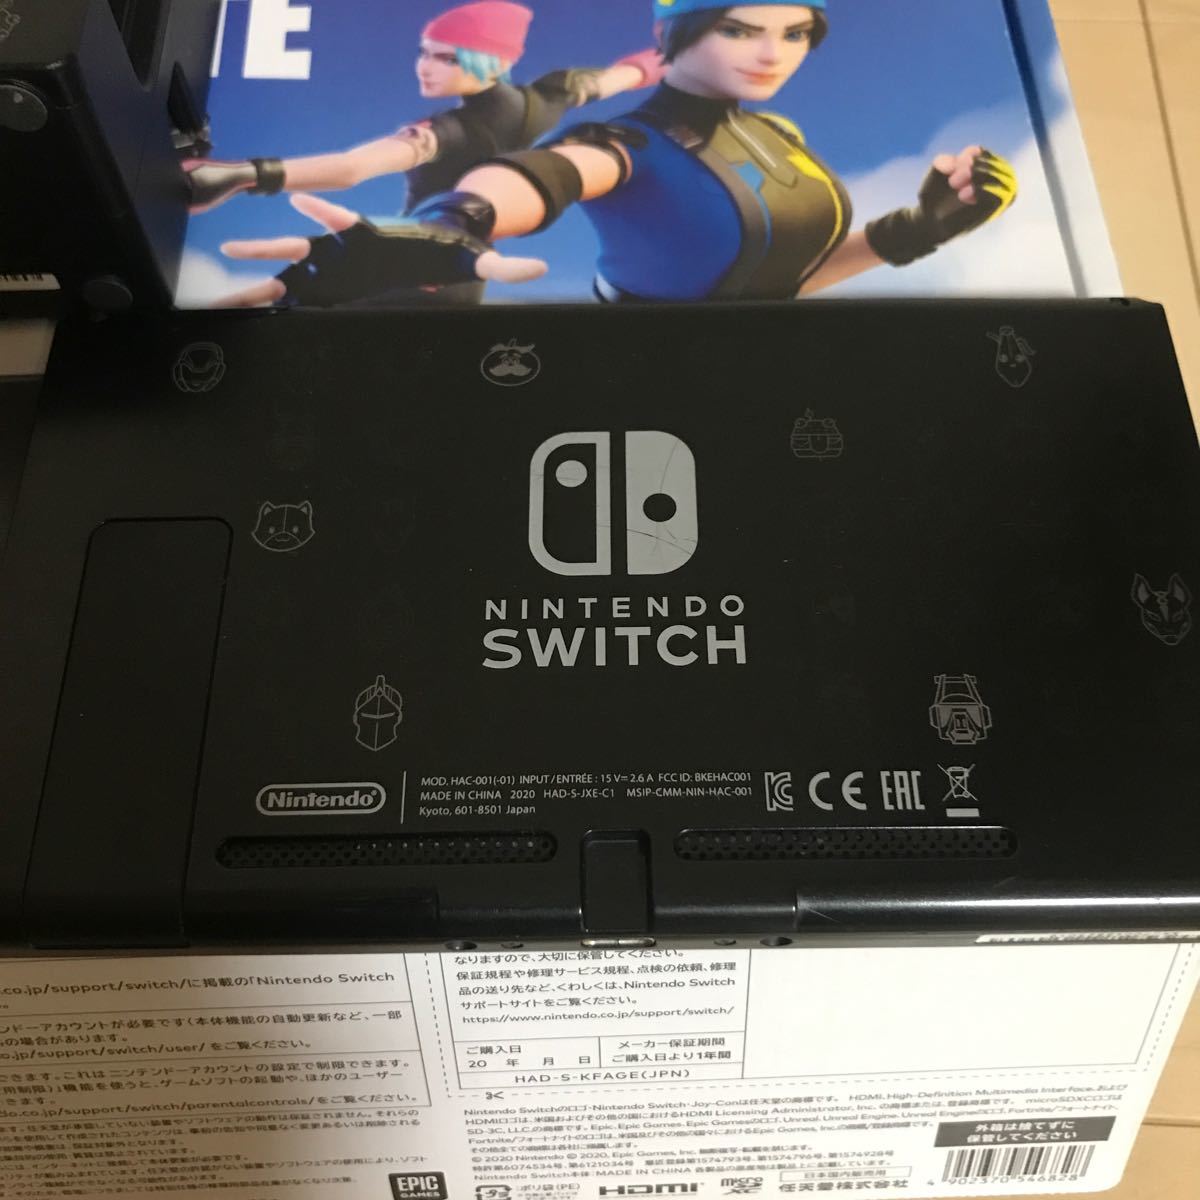 Nintendo Switch フォートナイトSpecialセット